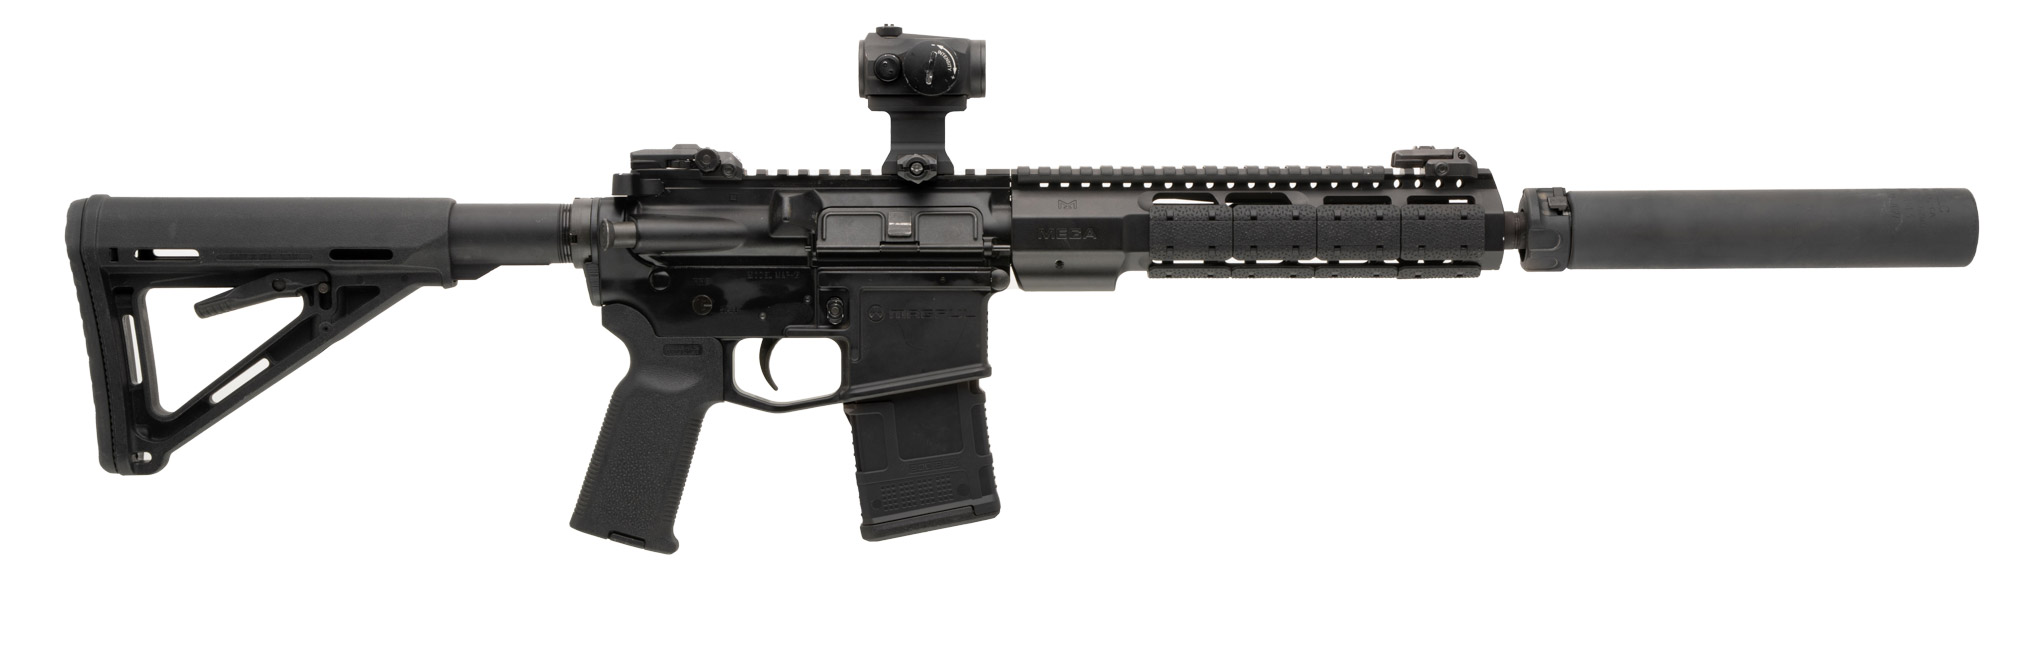 The PMAG 20 AR 300 B GEN M3 for 300 Blackout is a purpose-built magazine fo...